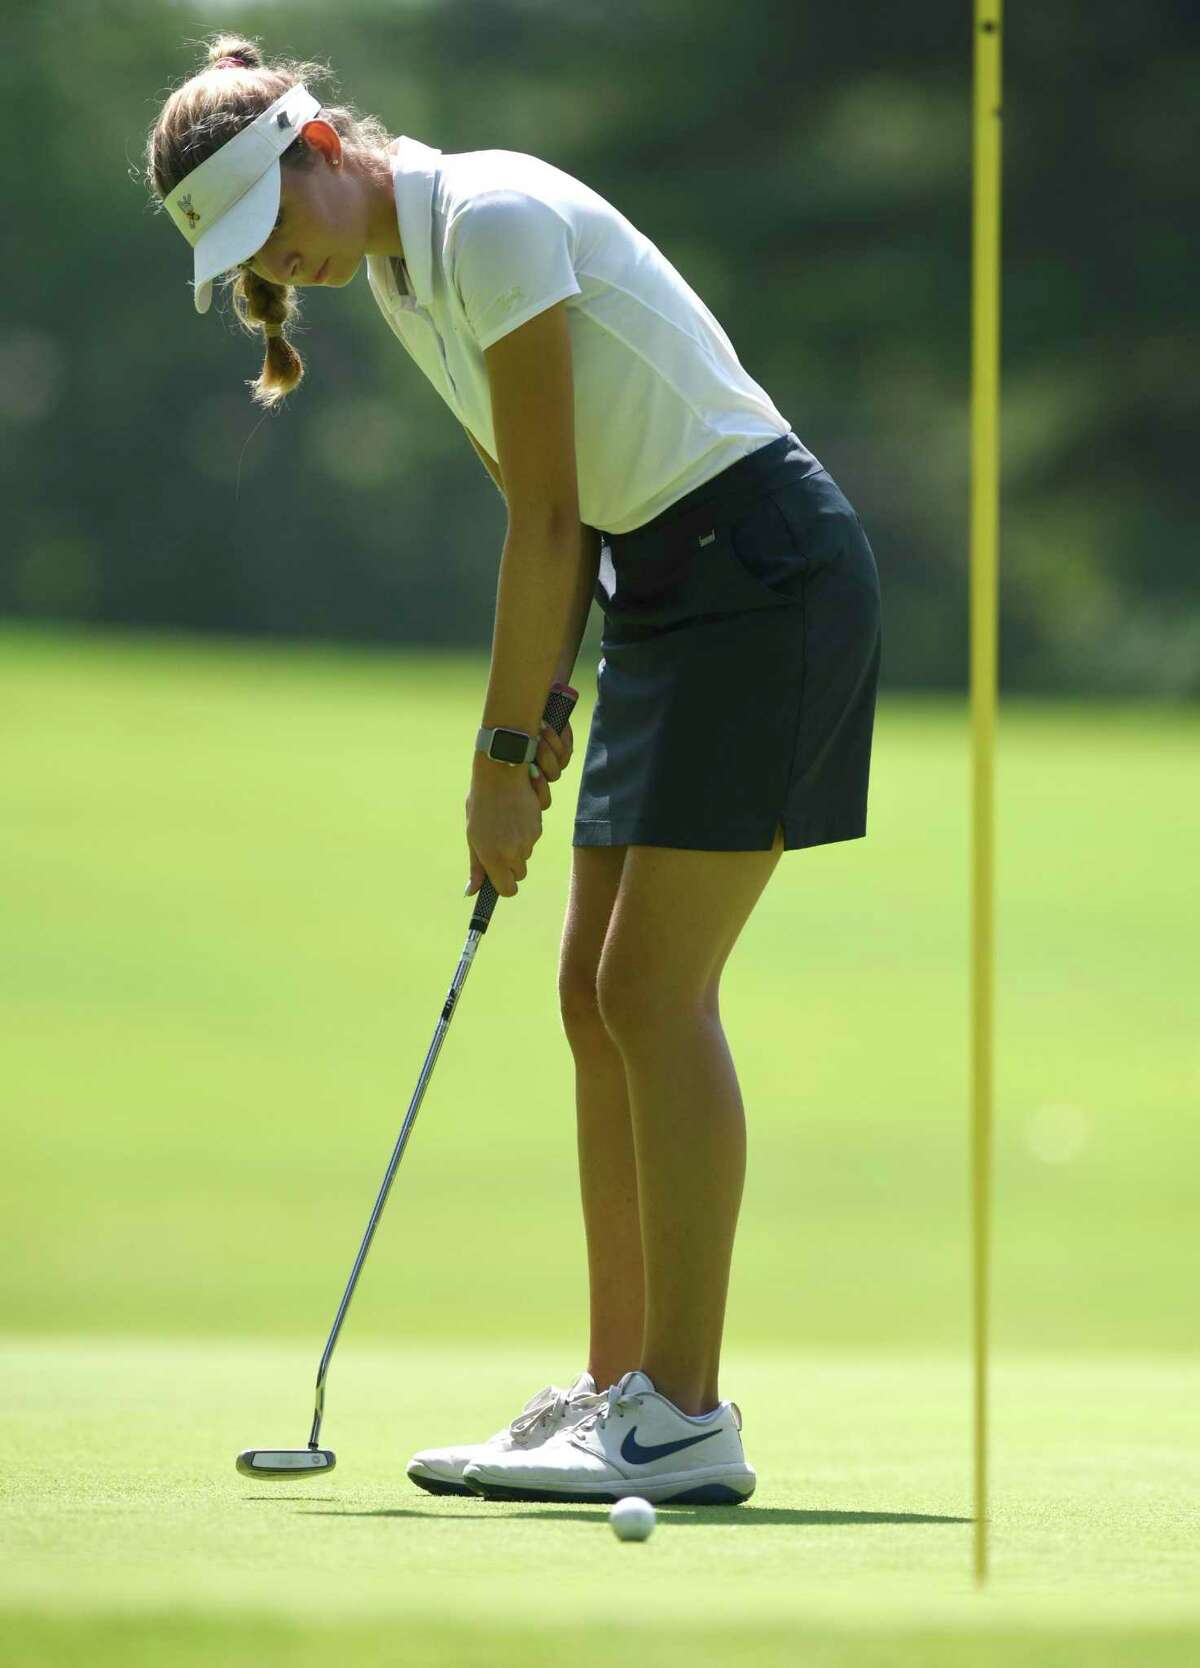 Juliette Santulin putts in the Town Wide Women's Golf Tournament at Griffith E. Harris Golf Course in Greenwich, Conn. Monday, June 28, 2021.